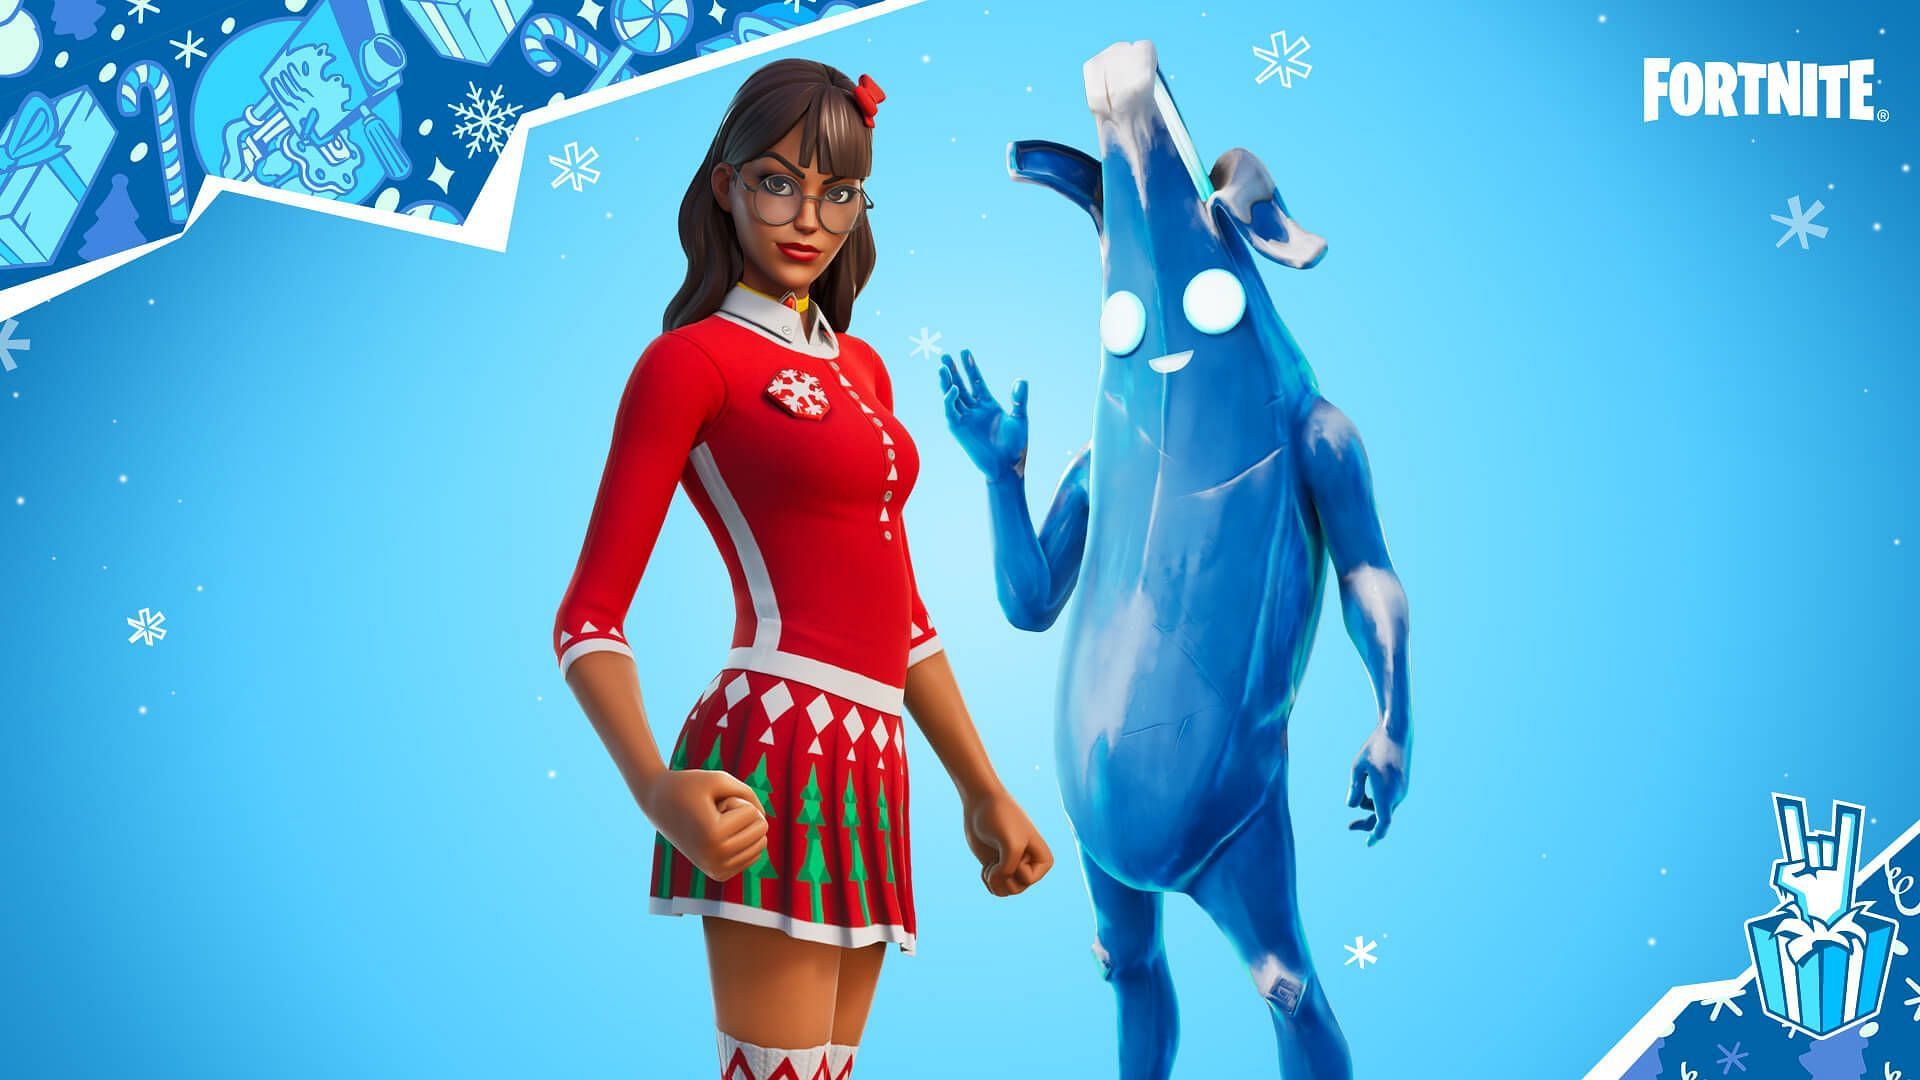 More free Christmas skins will most likely be released with the upcoming Fortnite event (Image via Epic Games)